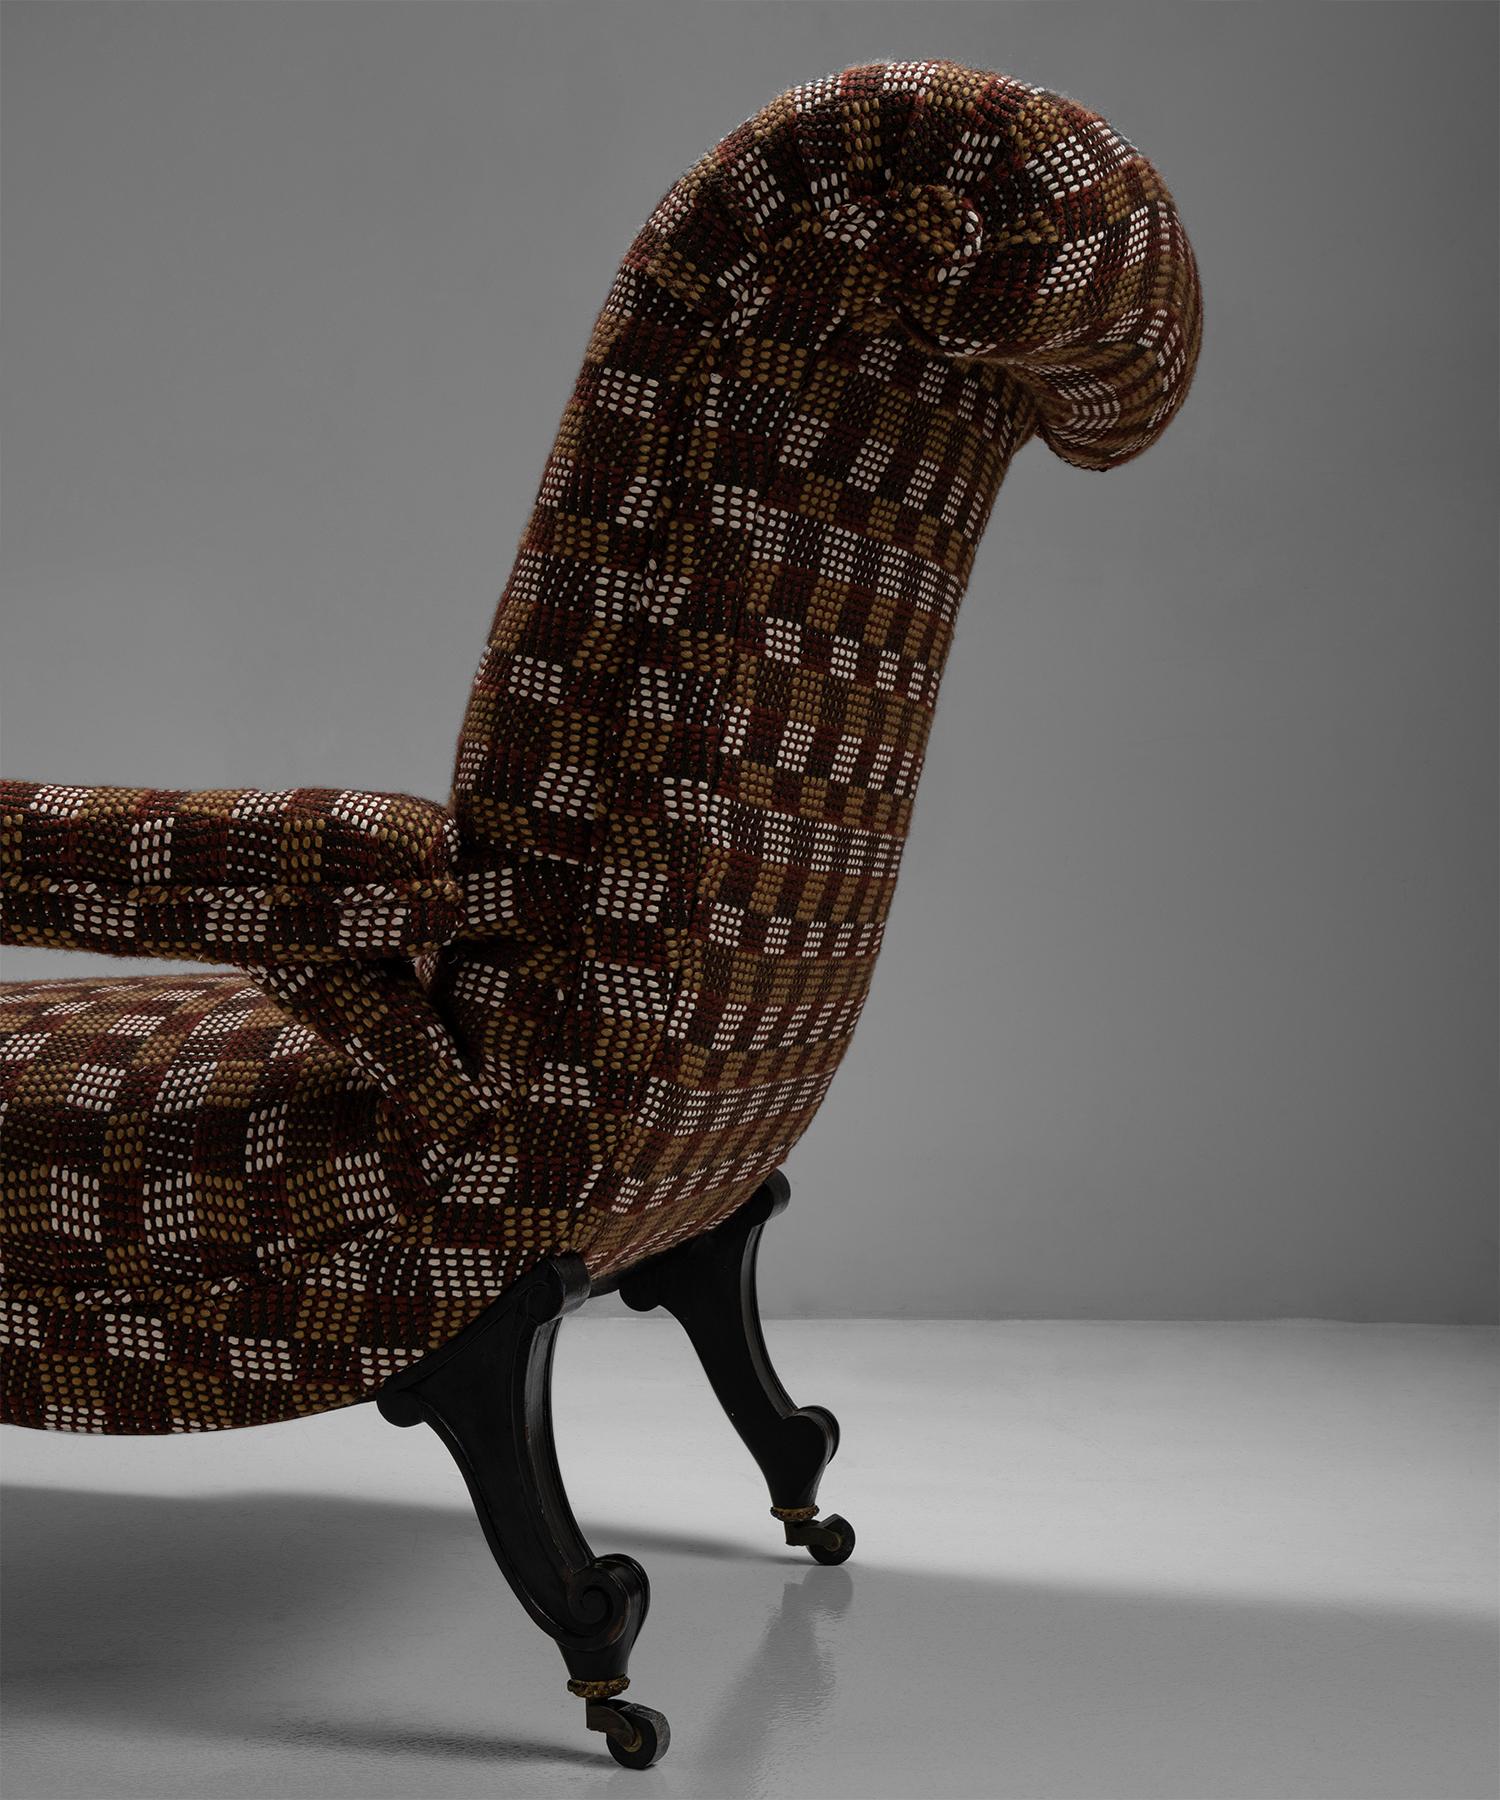 19th Century Pair of Scroll Back Armchairs in Wool Blend from Pierre Frey, France, Circa 1890